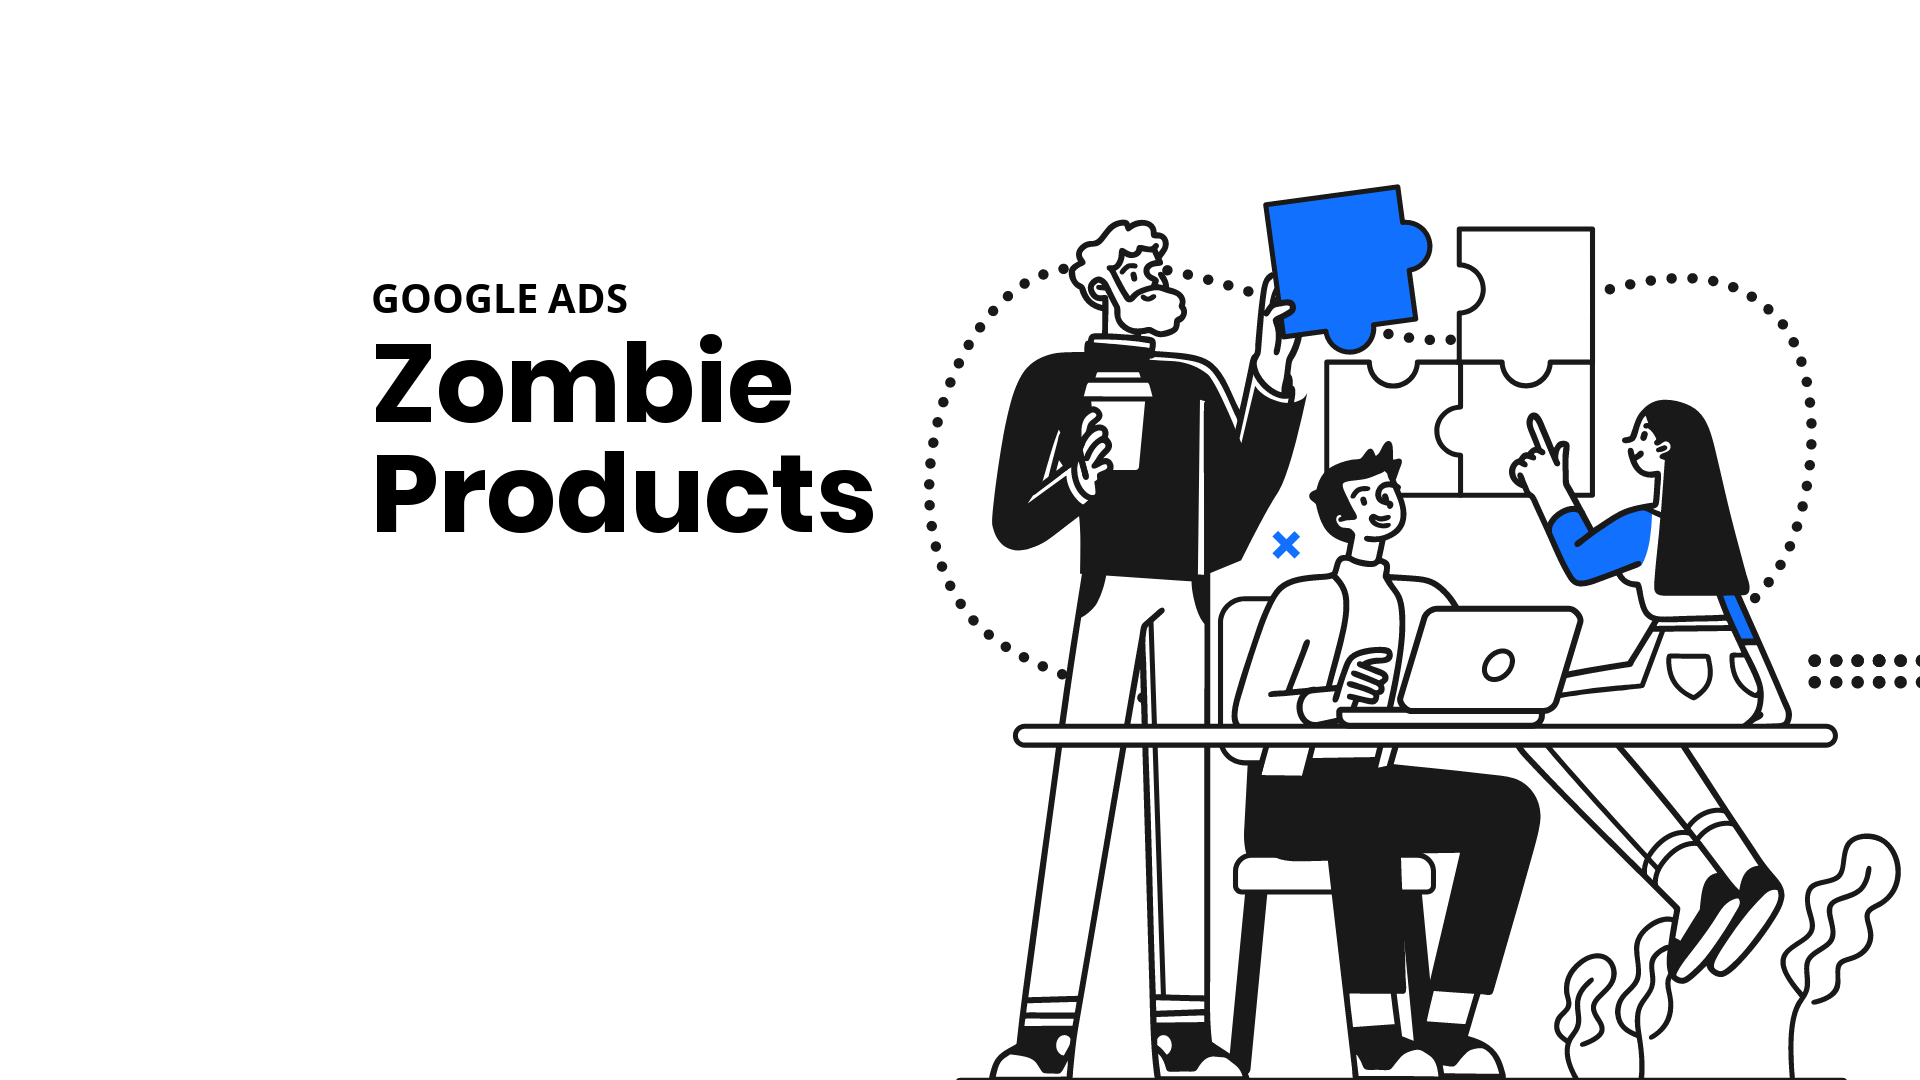 Zombie products in Google Ads